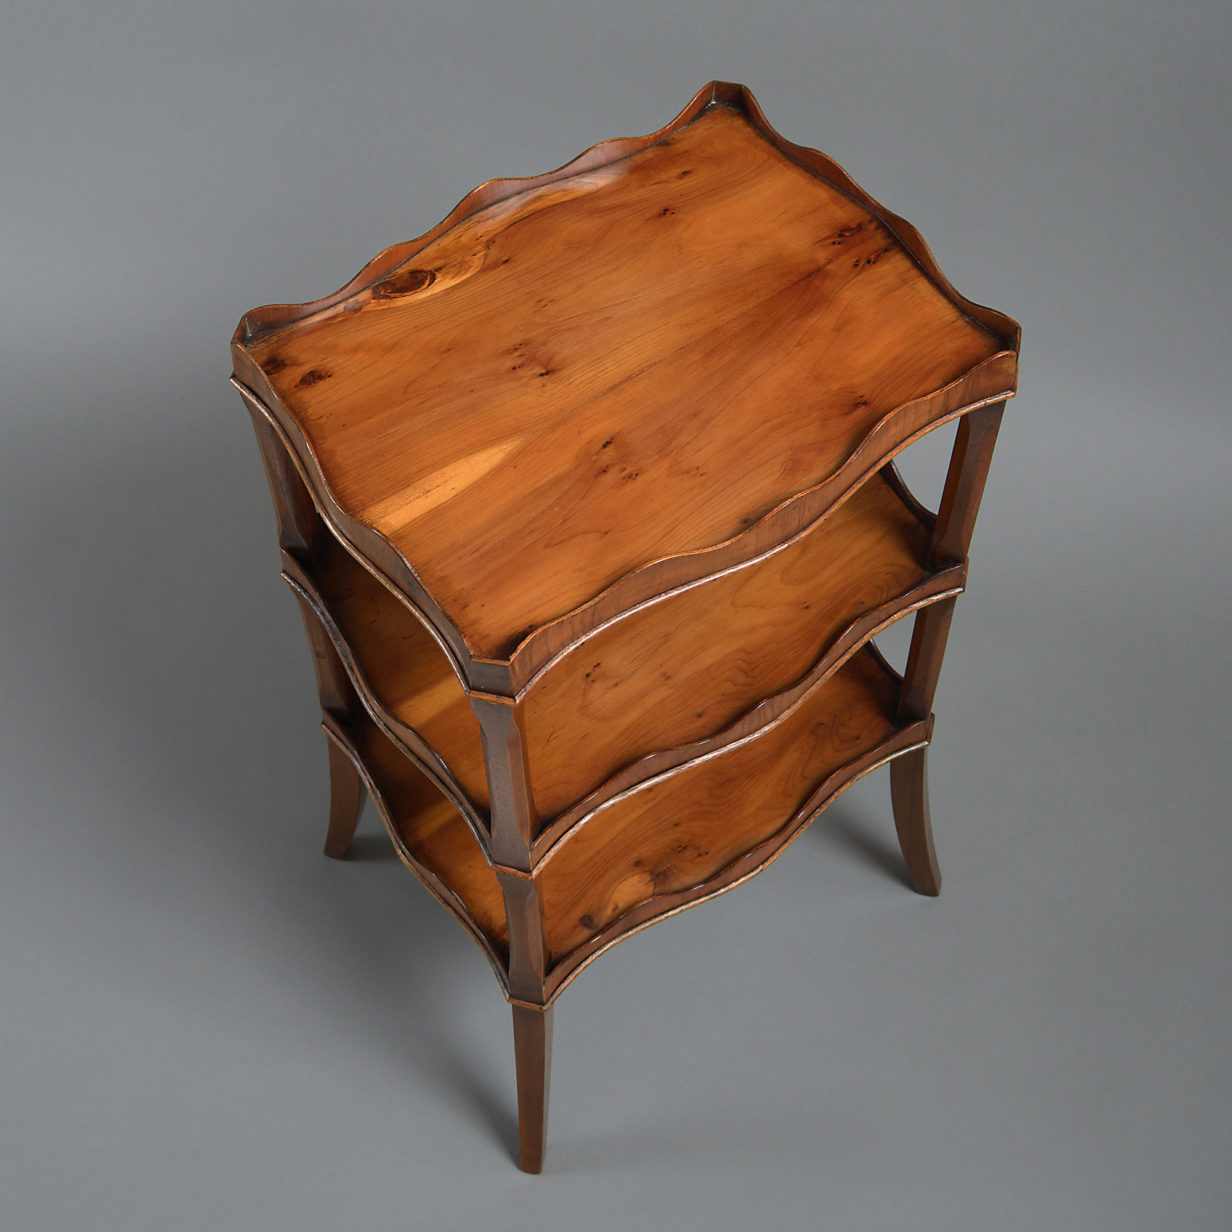 A late 19th century yew wood three tier etagere